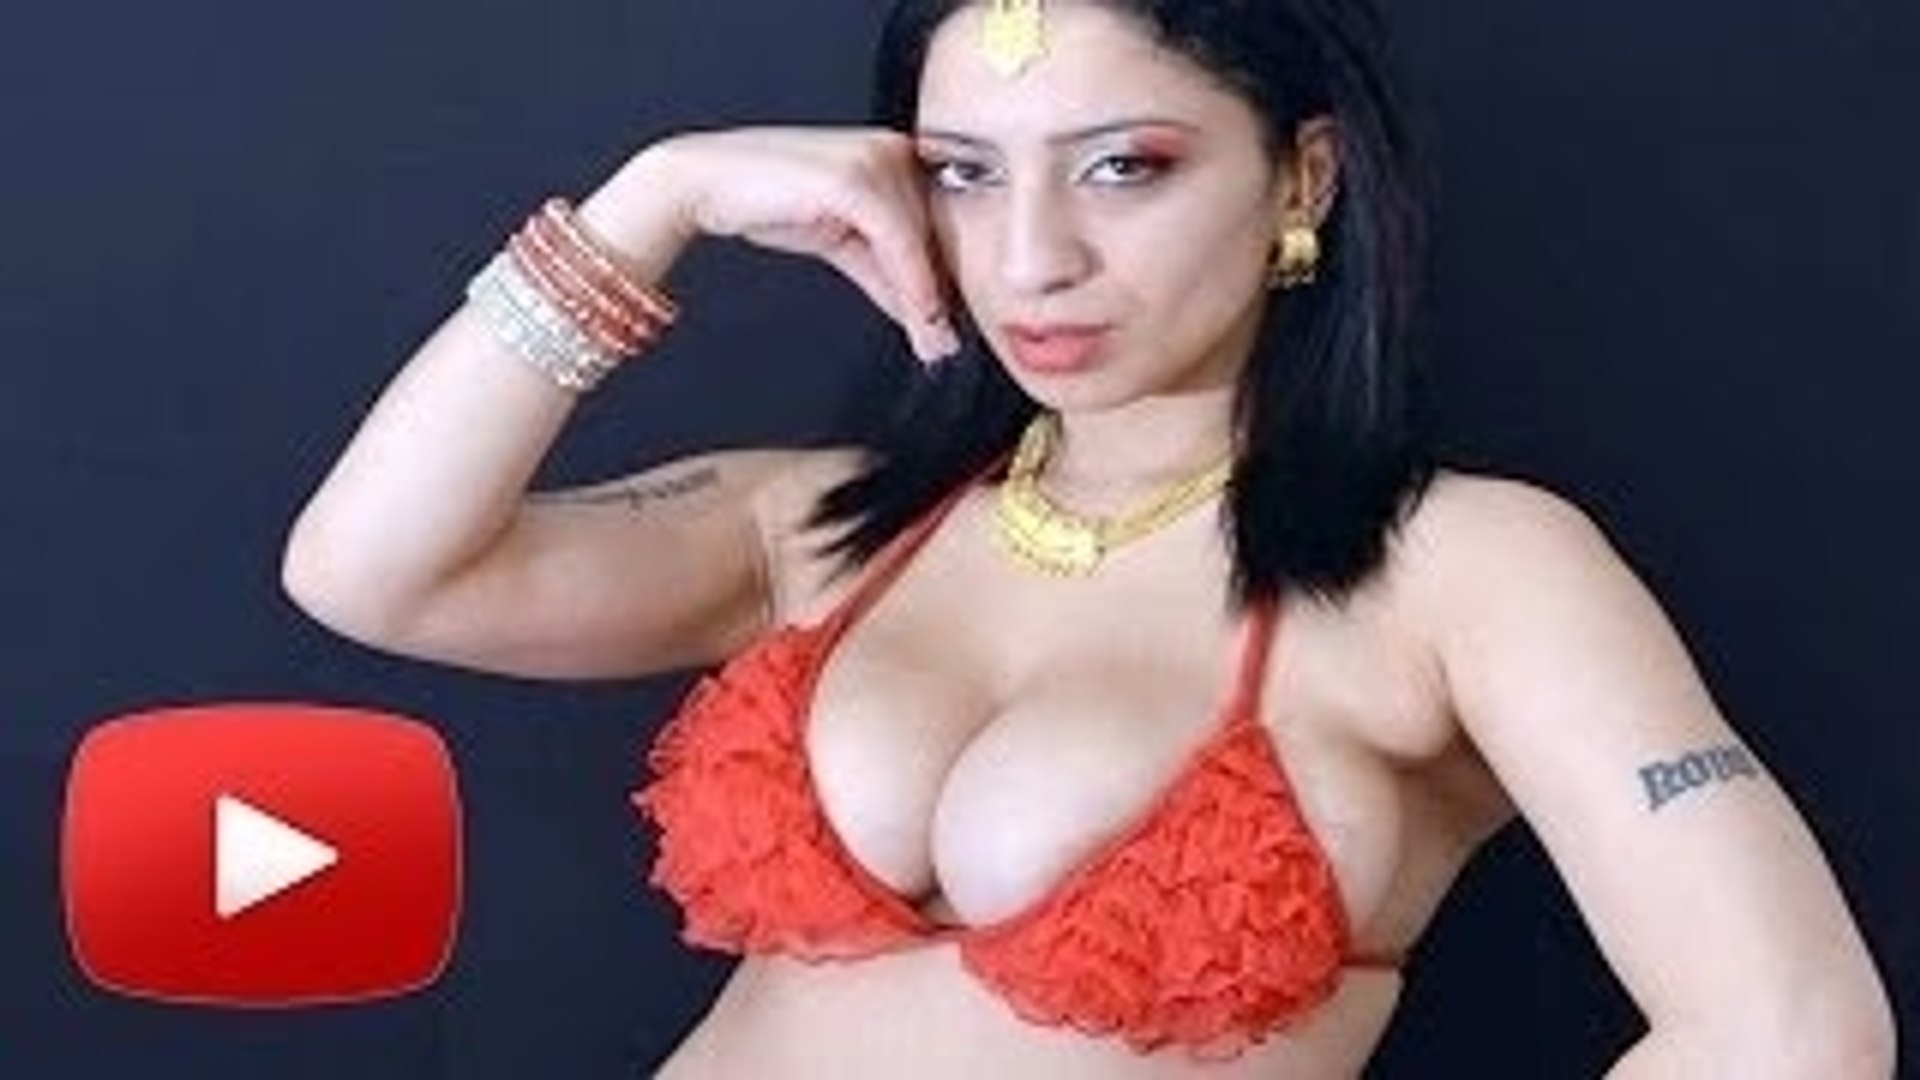 Indian Porn Star Shanti - India Accepts Another PORN STAR Shanti Dyanamite - video Dailymotion